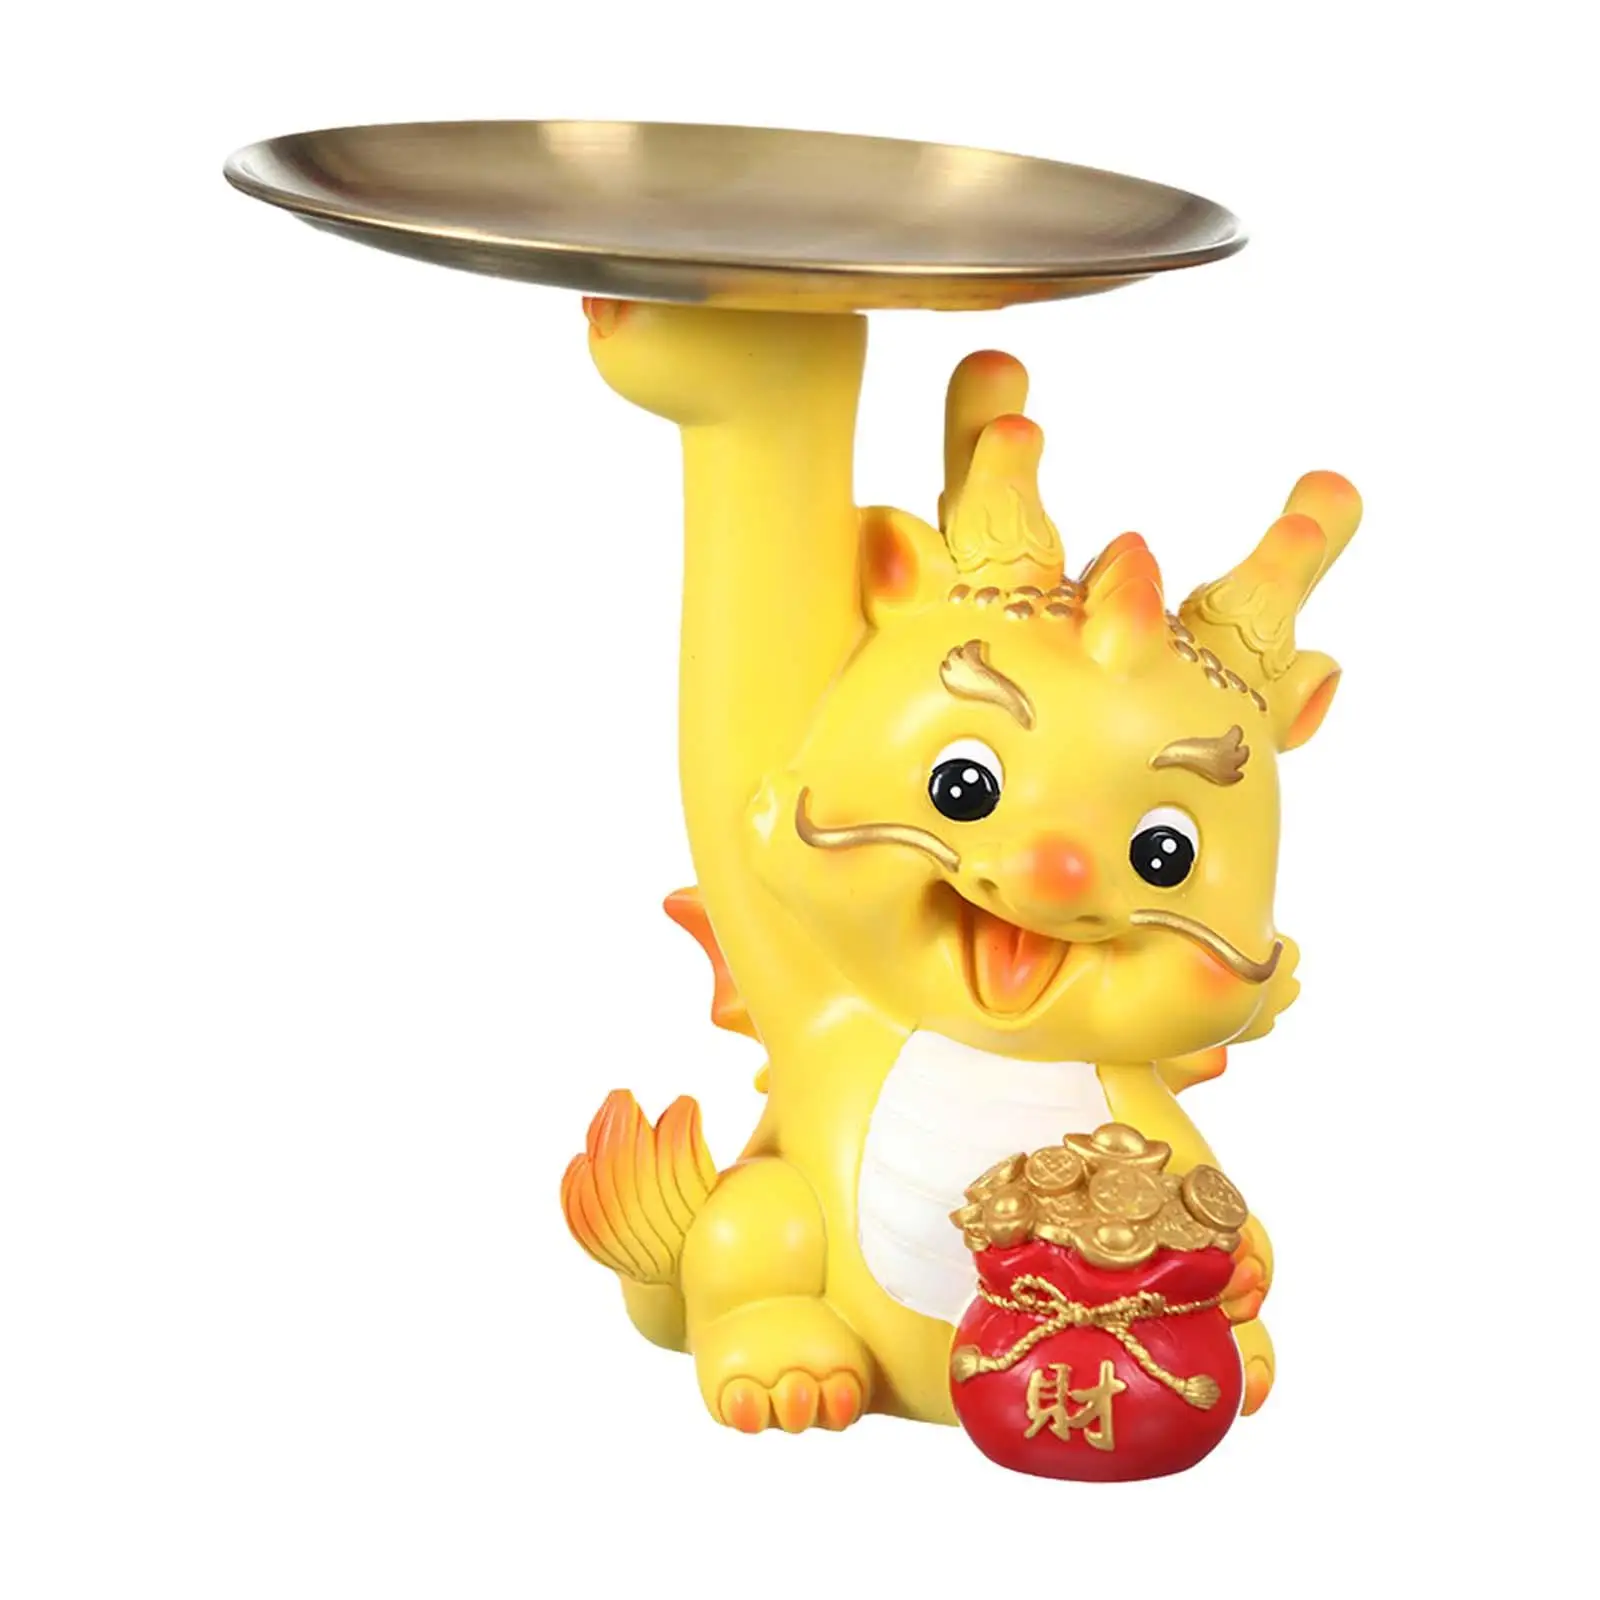 Chinese New Year Dragon Figurine Tray Ornament for Cabinet Bedroom Bookshelf